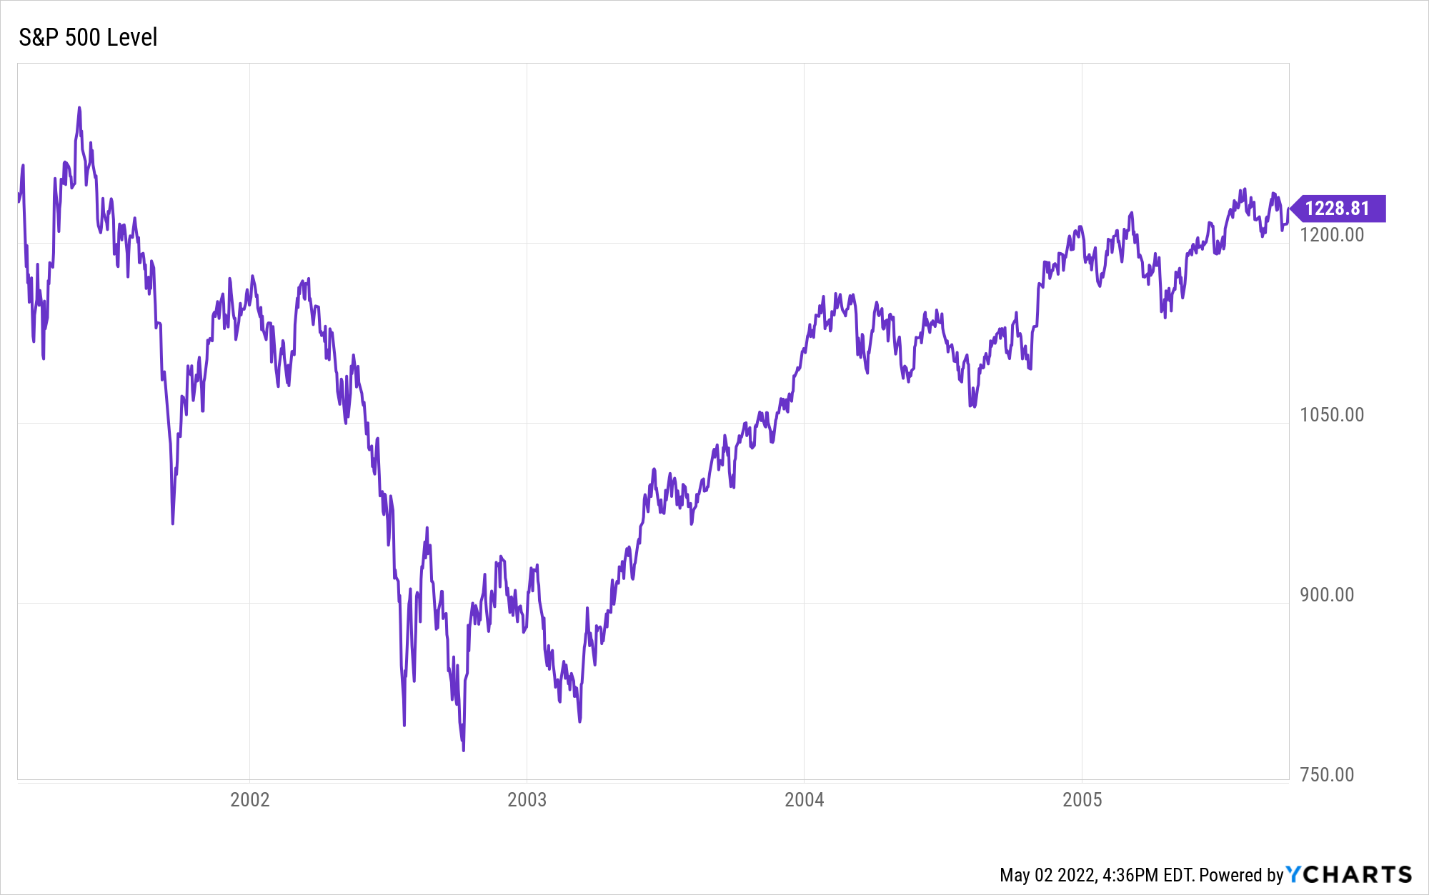 A chart showing the levels of the S&P 500 from 2001 to 2006.